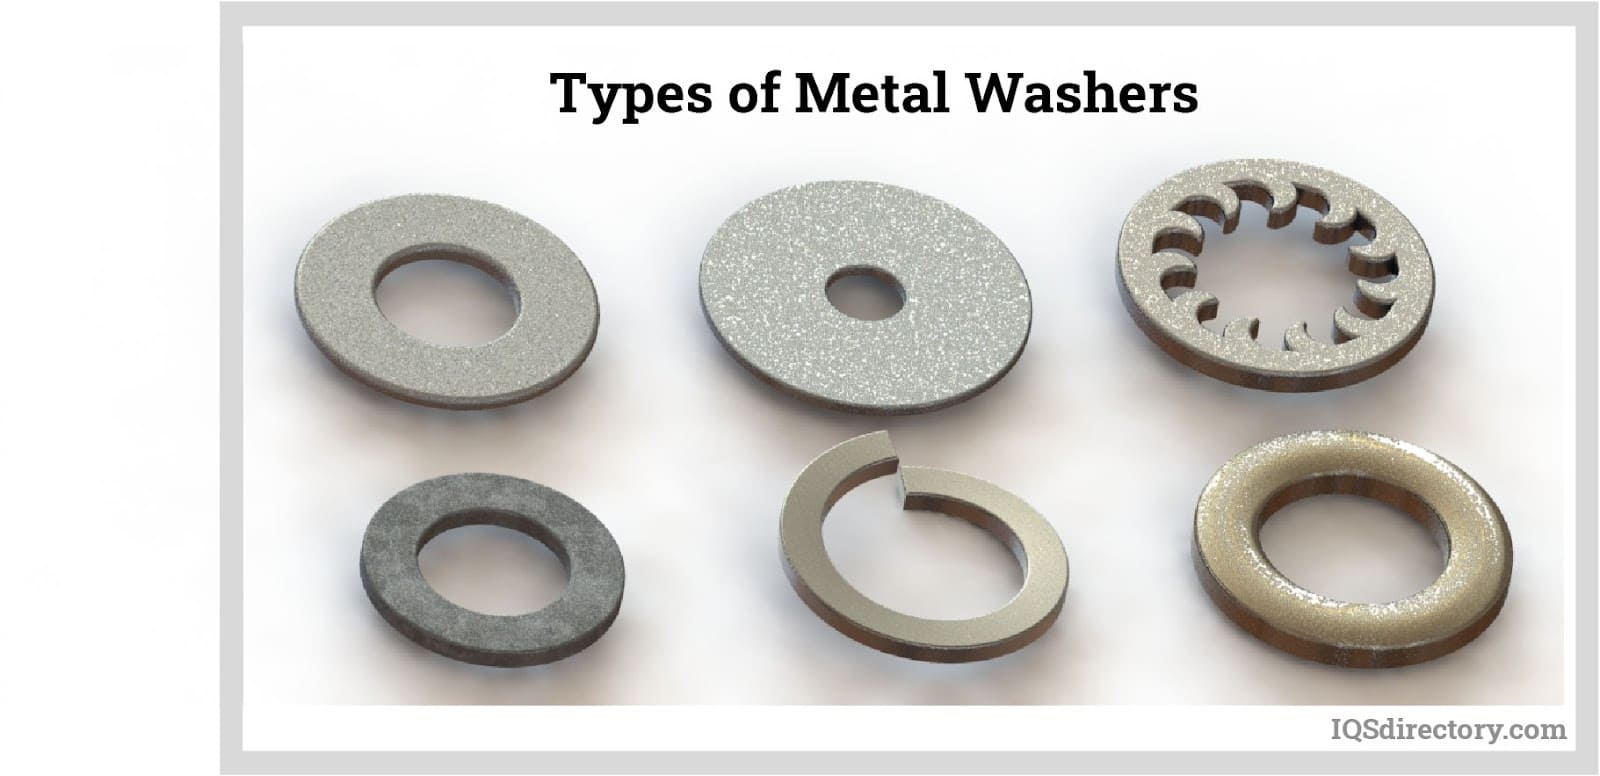 Metal Washers: Types, Uses, Features and Benefits